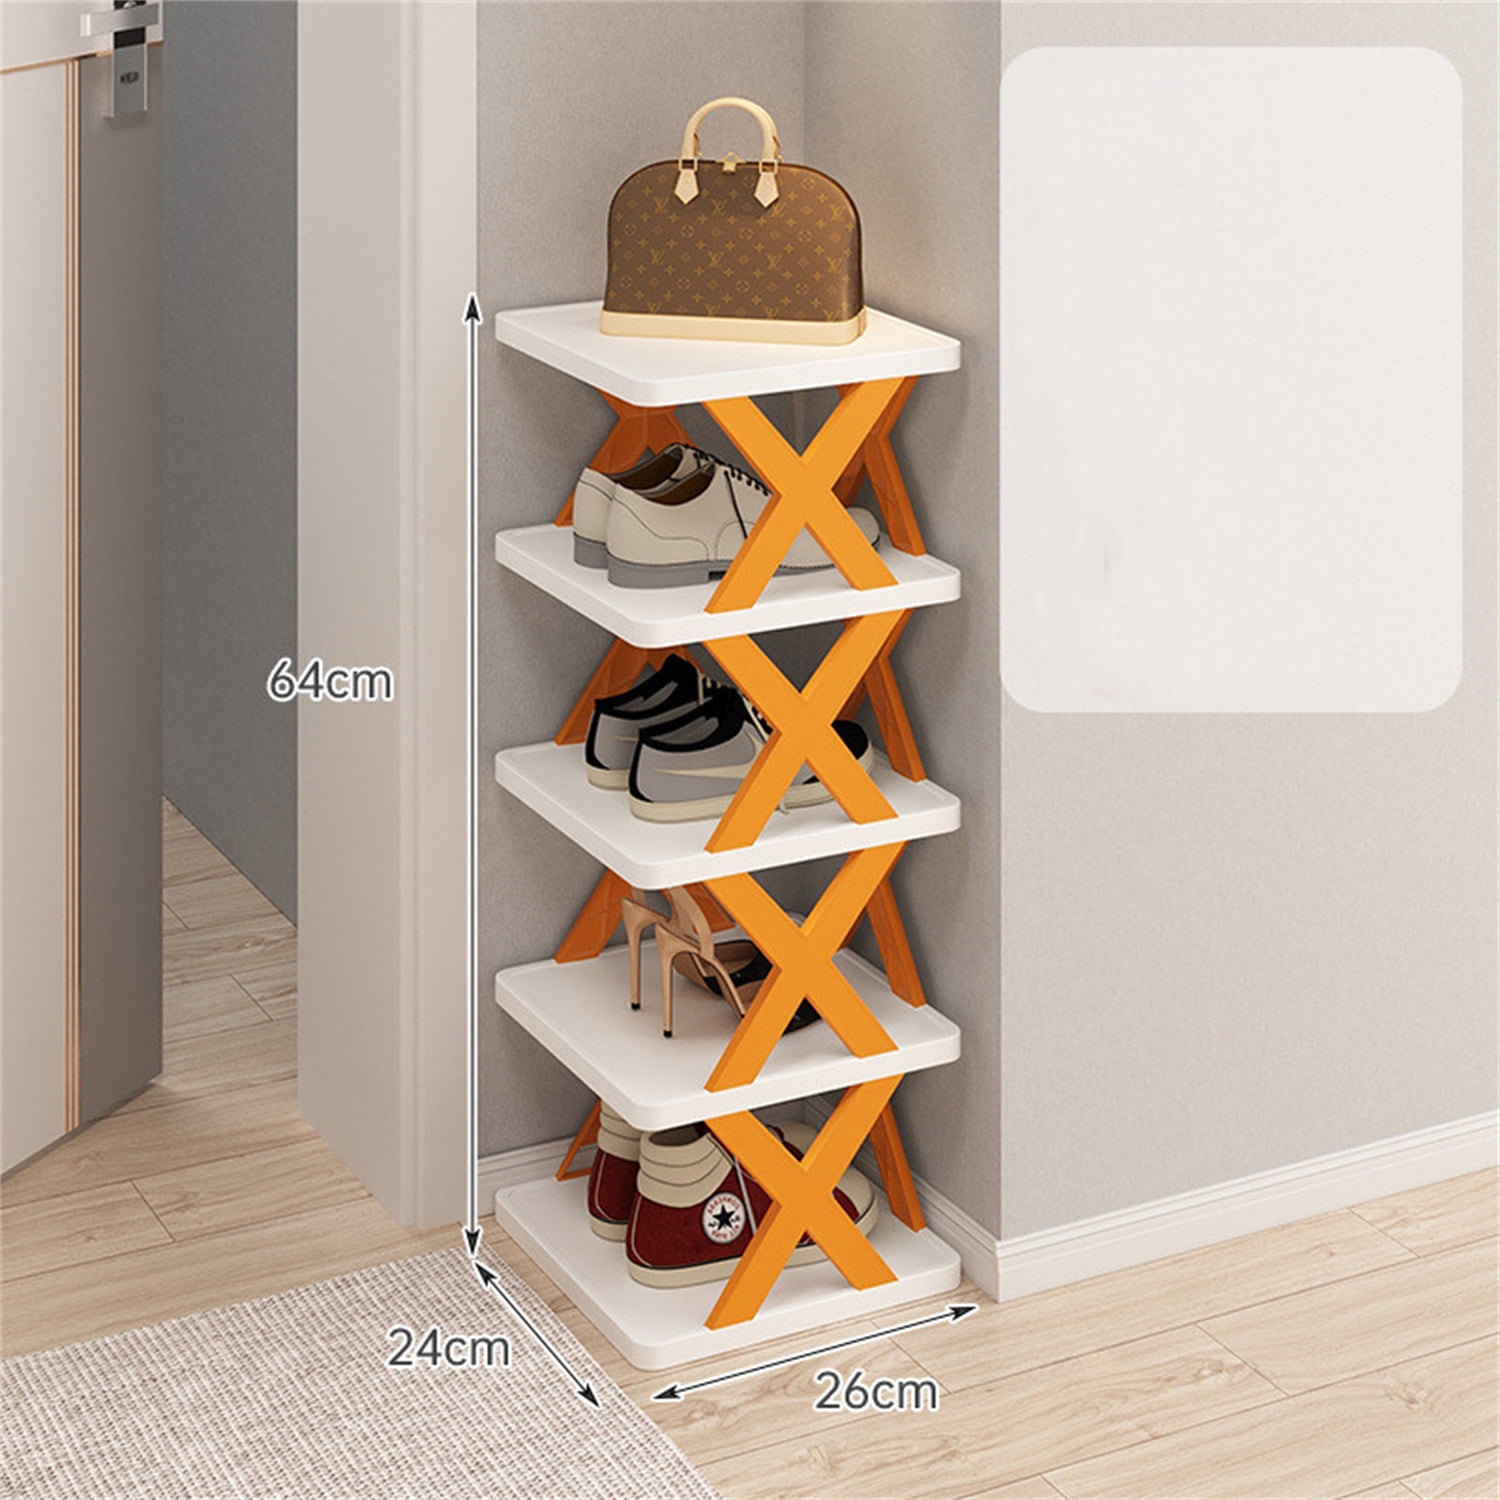 starogegc 9 Tier Shoe Rack For Entryway, Corner Shoe Organizer, Tall Shoe  Tower Rack for Small Spaces, Shoe Rack Storage Organizer, Vertical Shoe